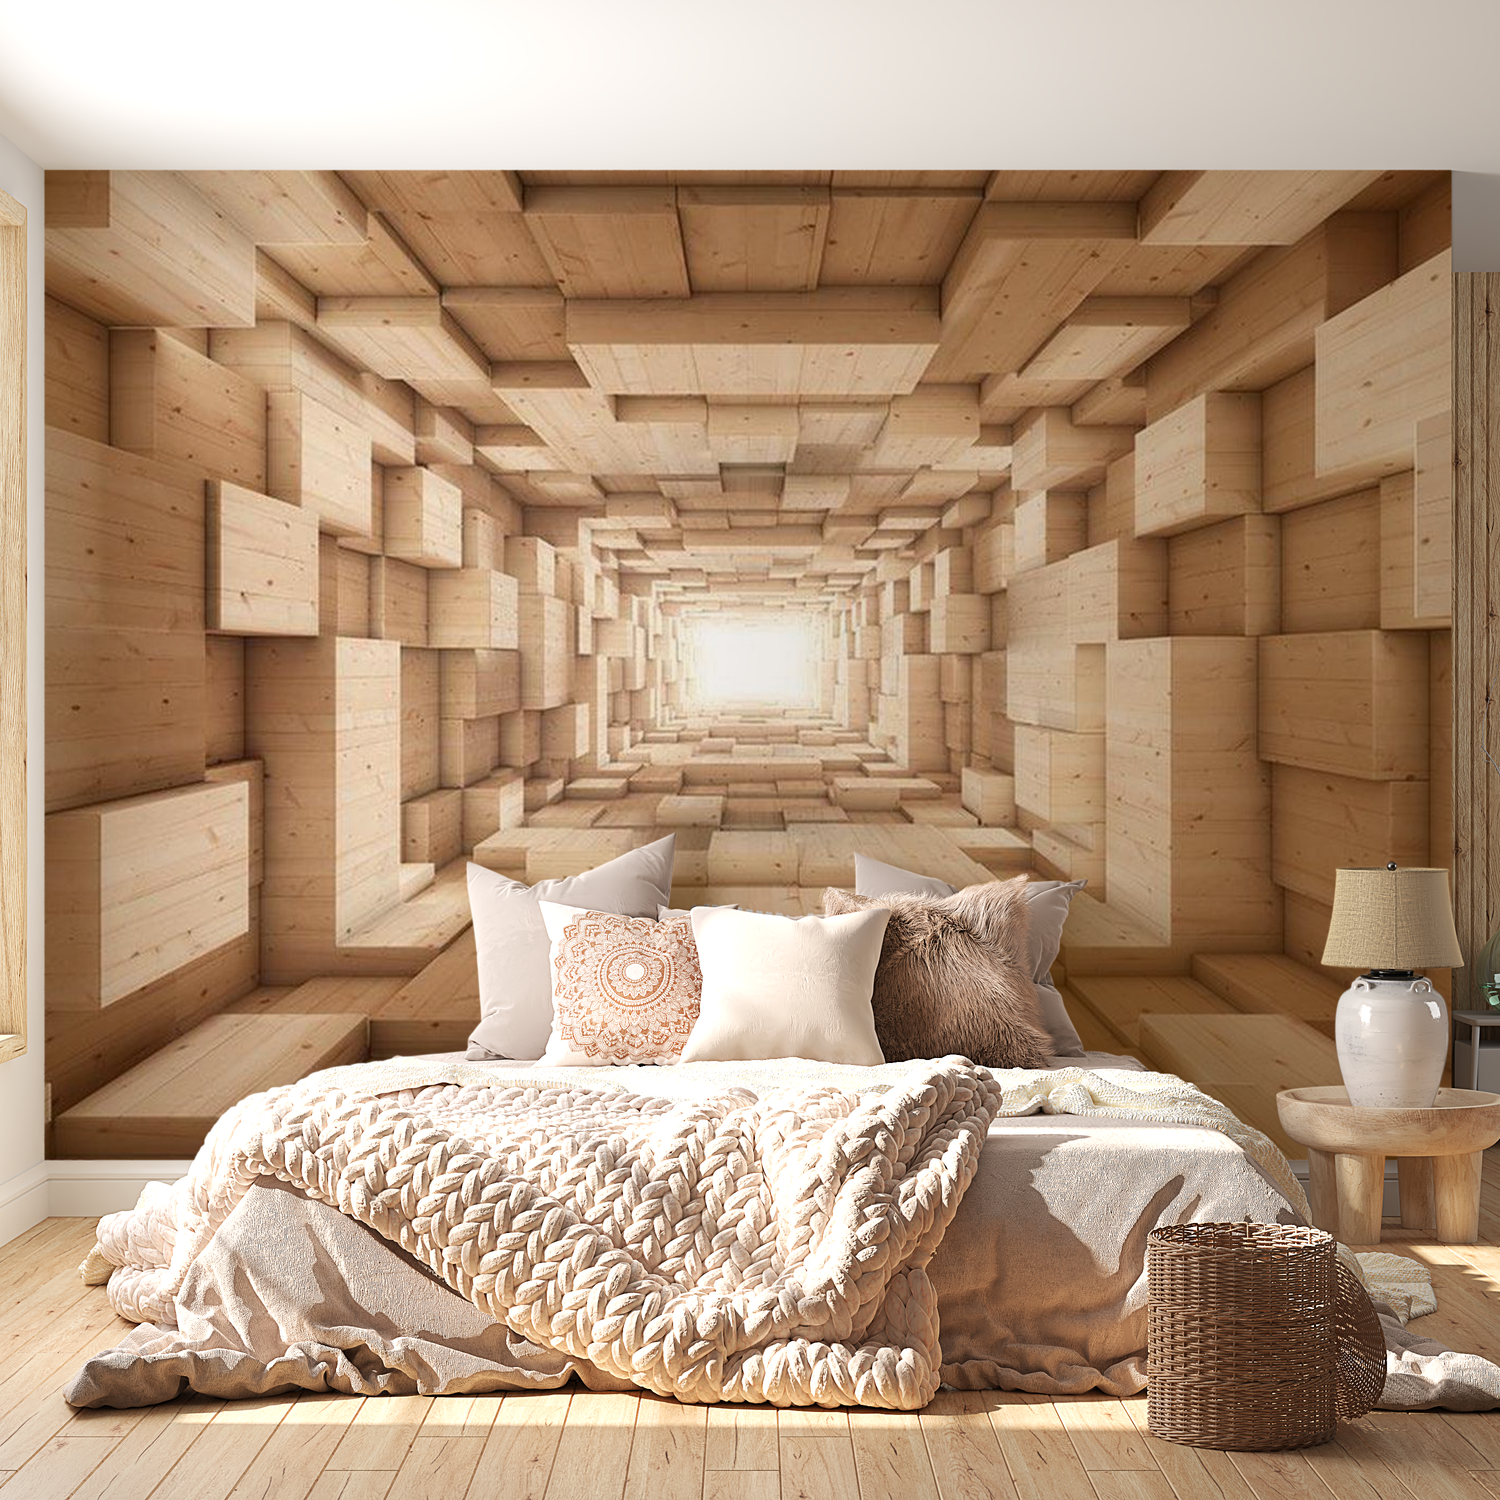 3D Illusion Wallpaper Wall Mural - Upwards Tunnel 39"Wx27"H